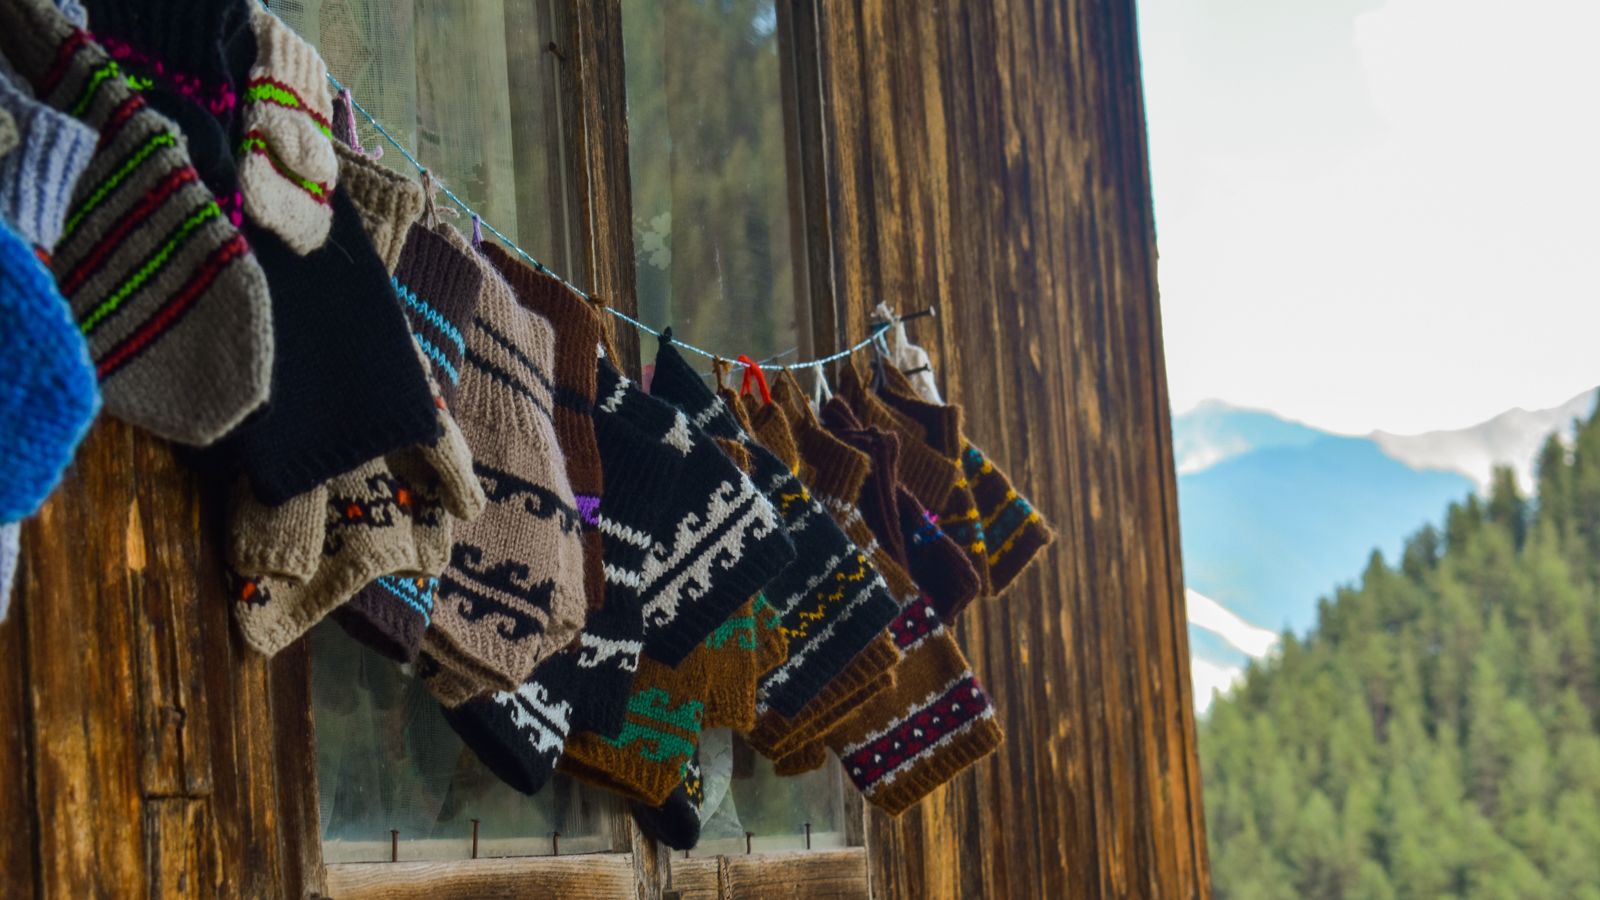 <strong>Socks appeal: </strong>Colorful woolen socks, hand-knitted by a local woman known as Masho Bebo, can be bought by hikers passing through the village.